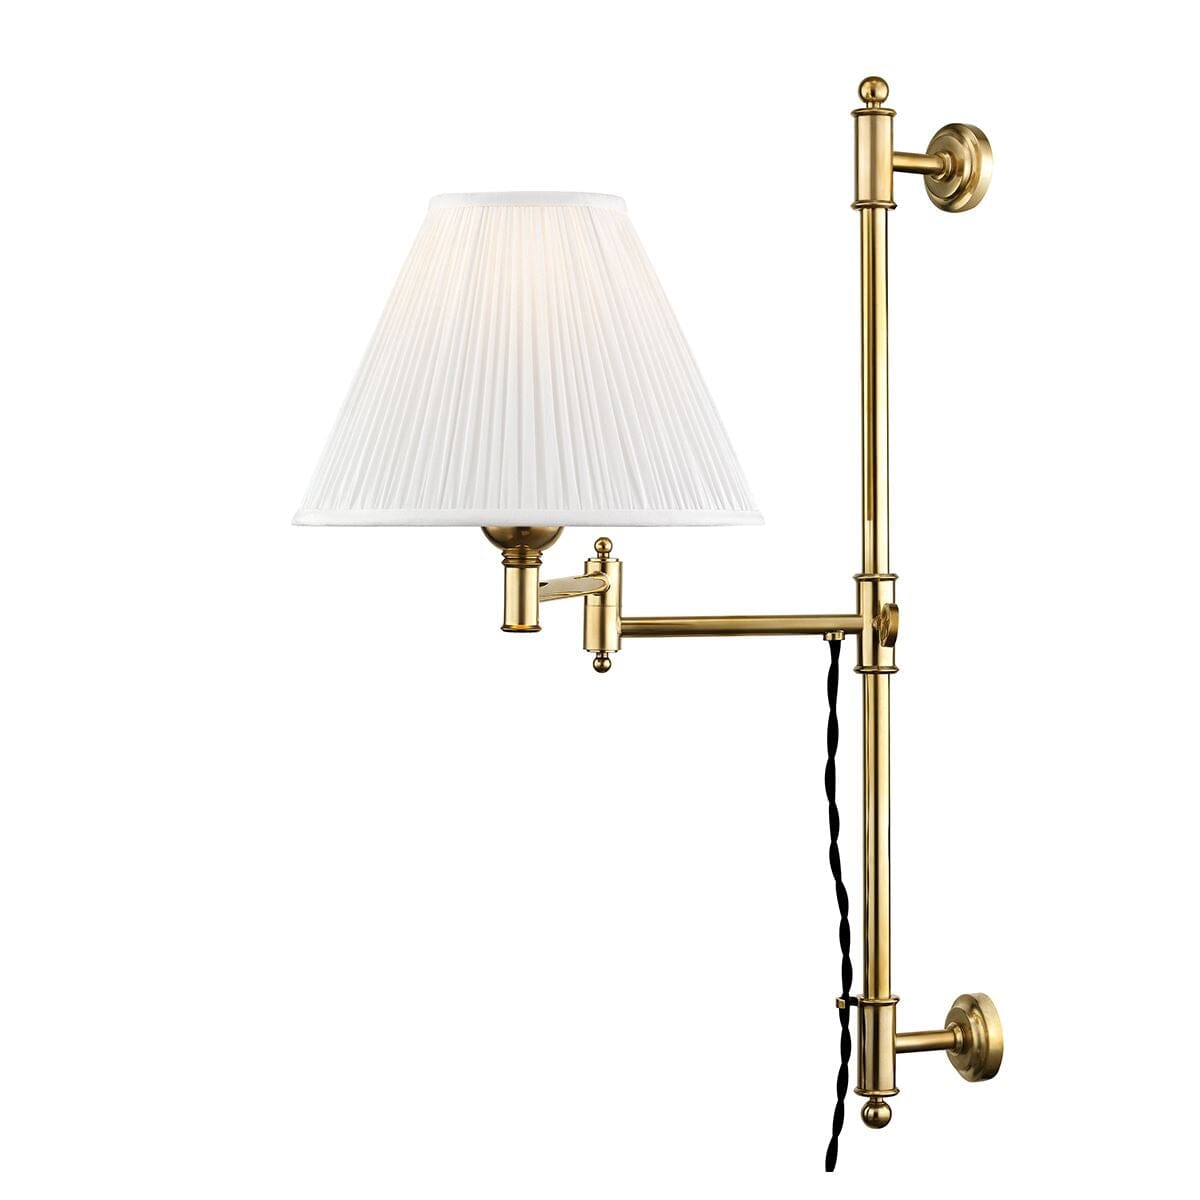 Oxford Sconce Aged Brass. Left side view.